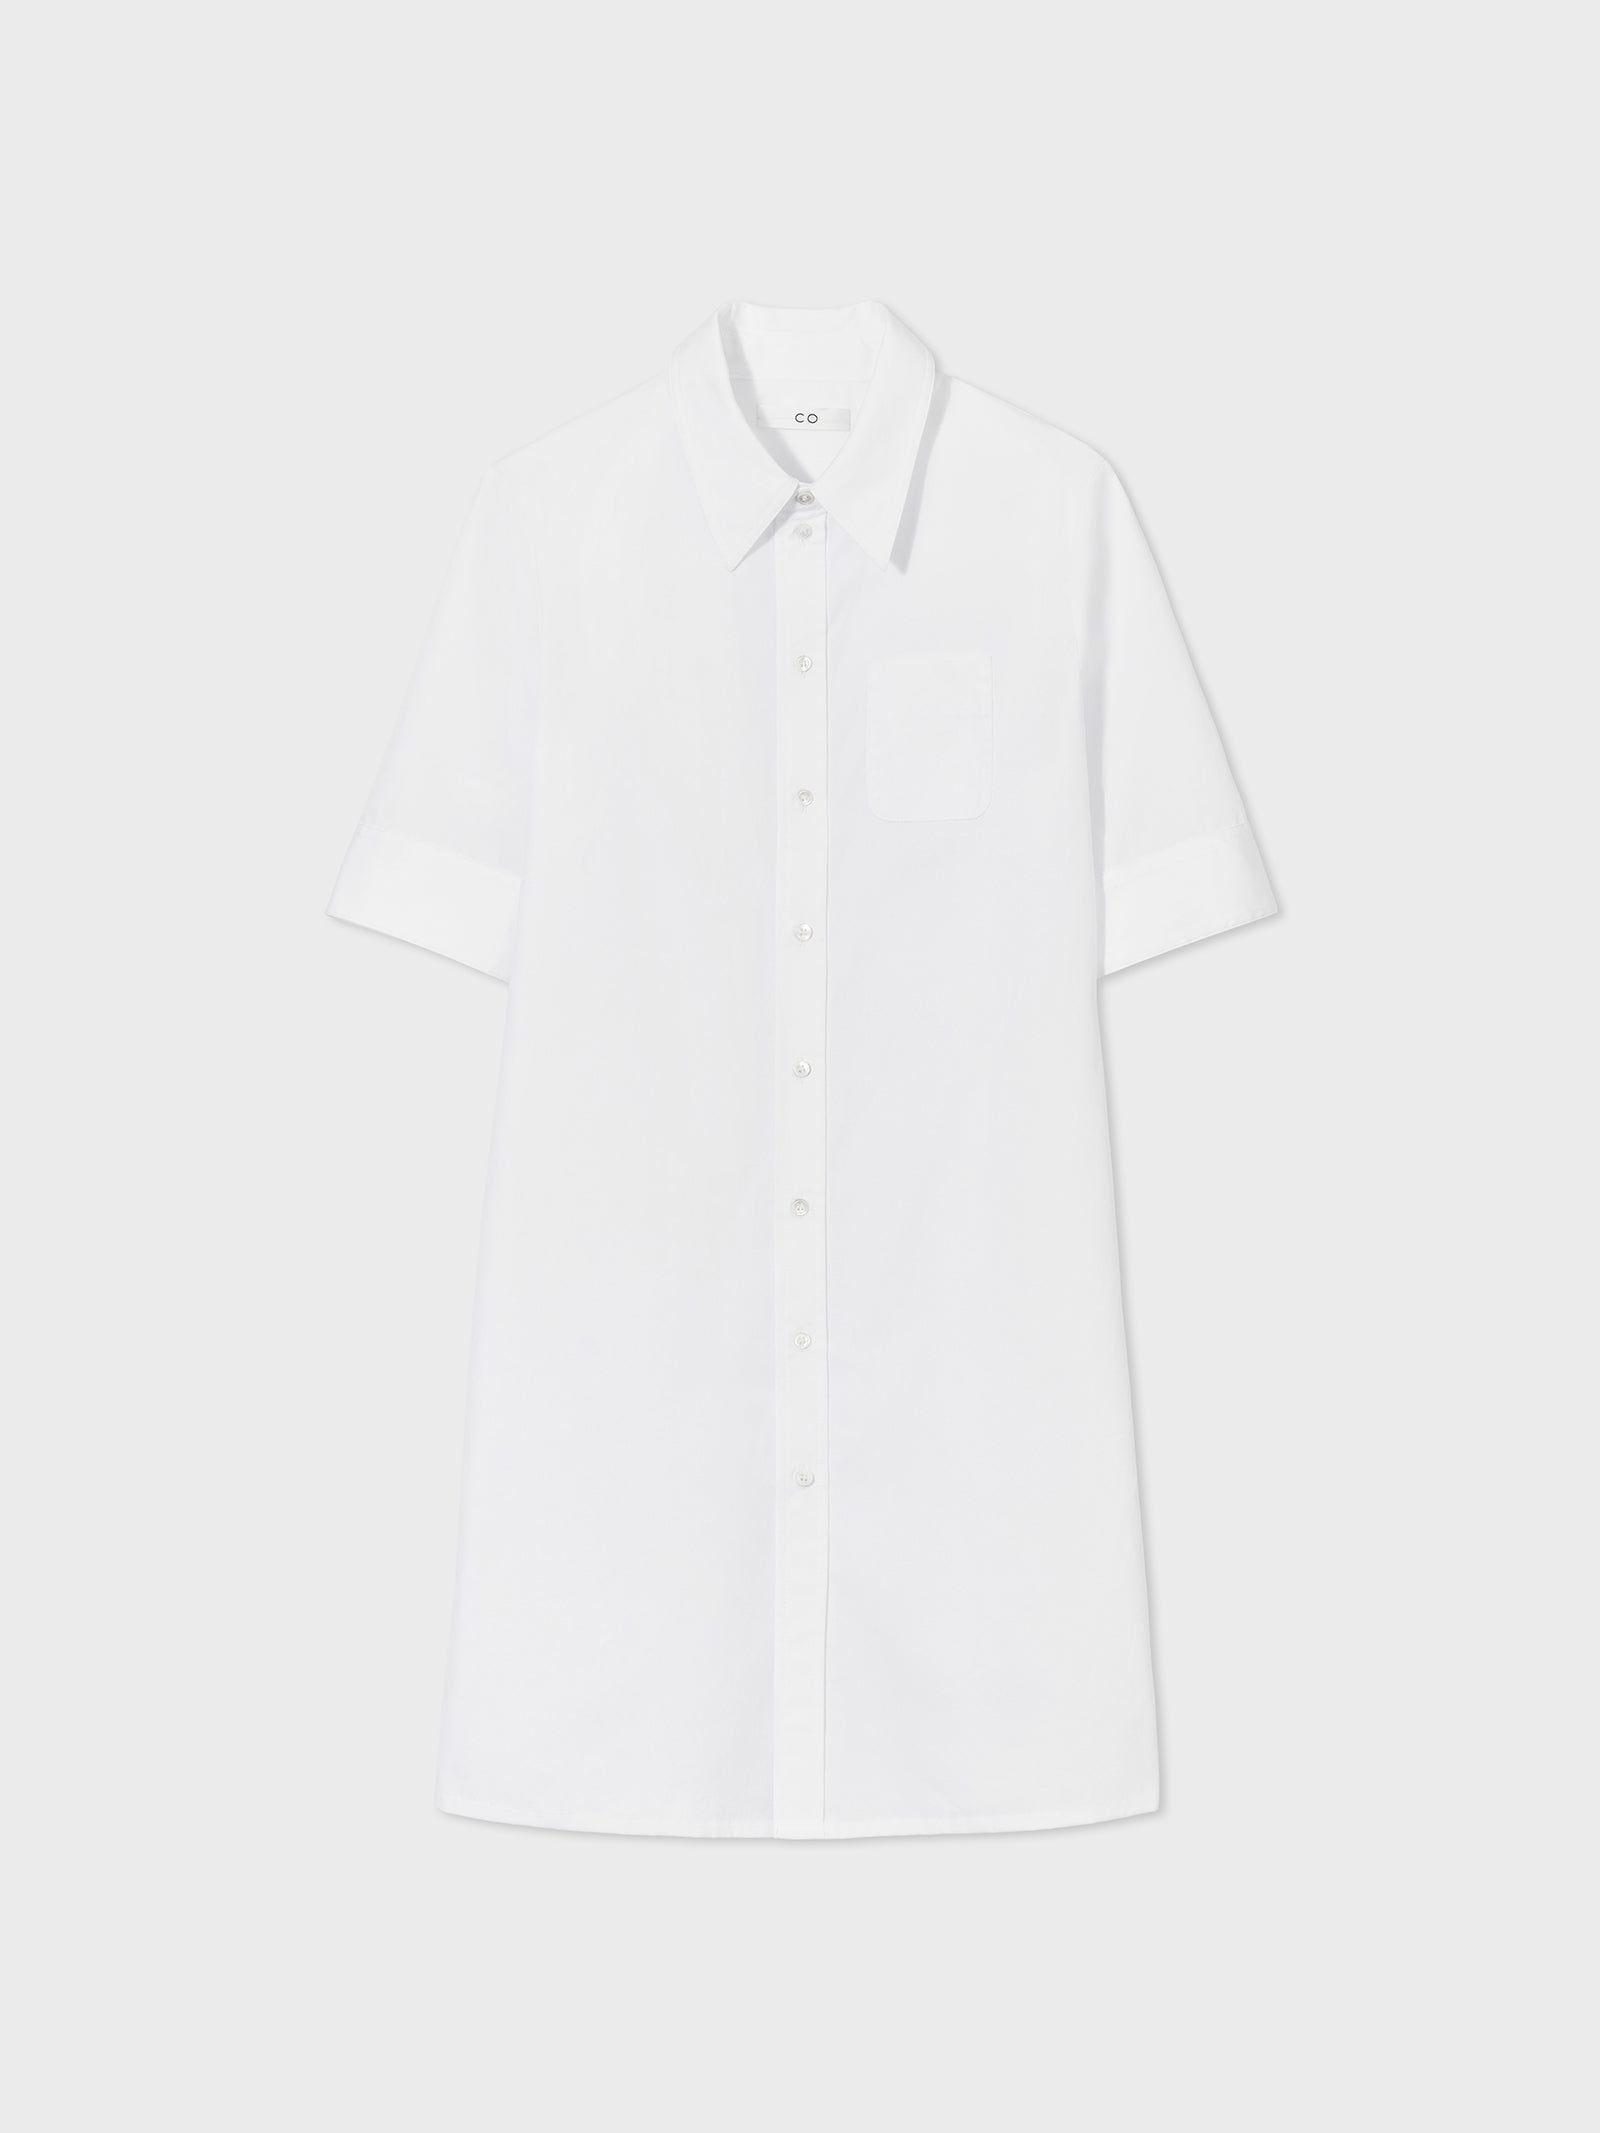 CO Fitted Shirtdress in Cotton Poplin